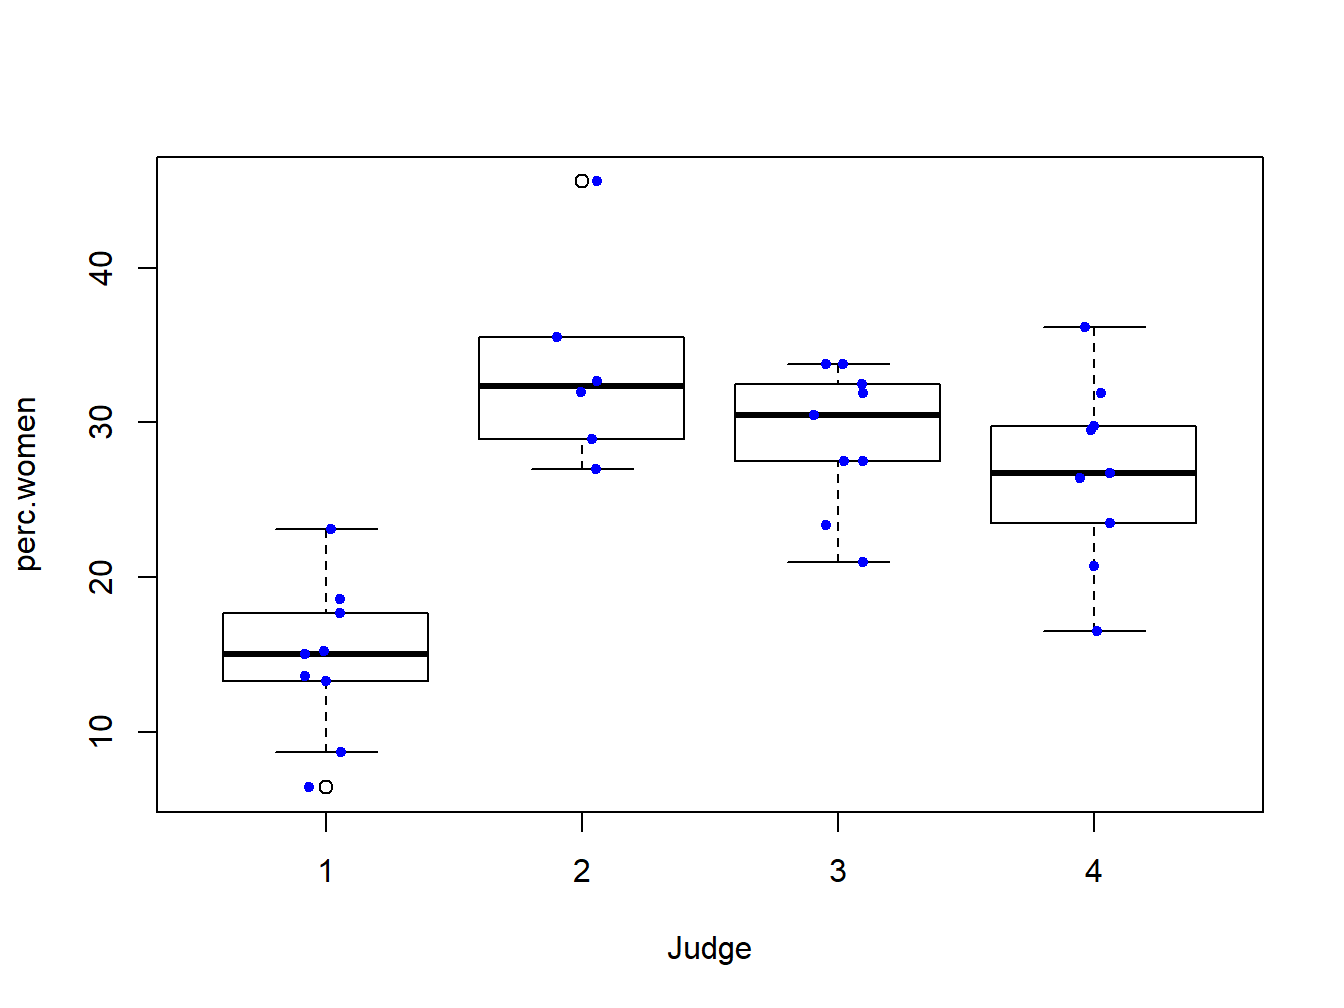 Box plot with jittered data points for the Spock trial data.